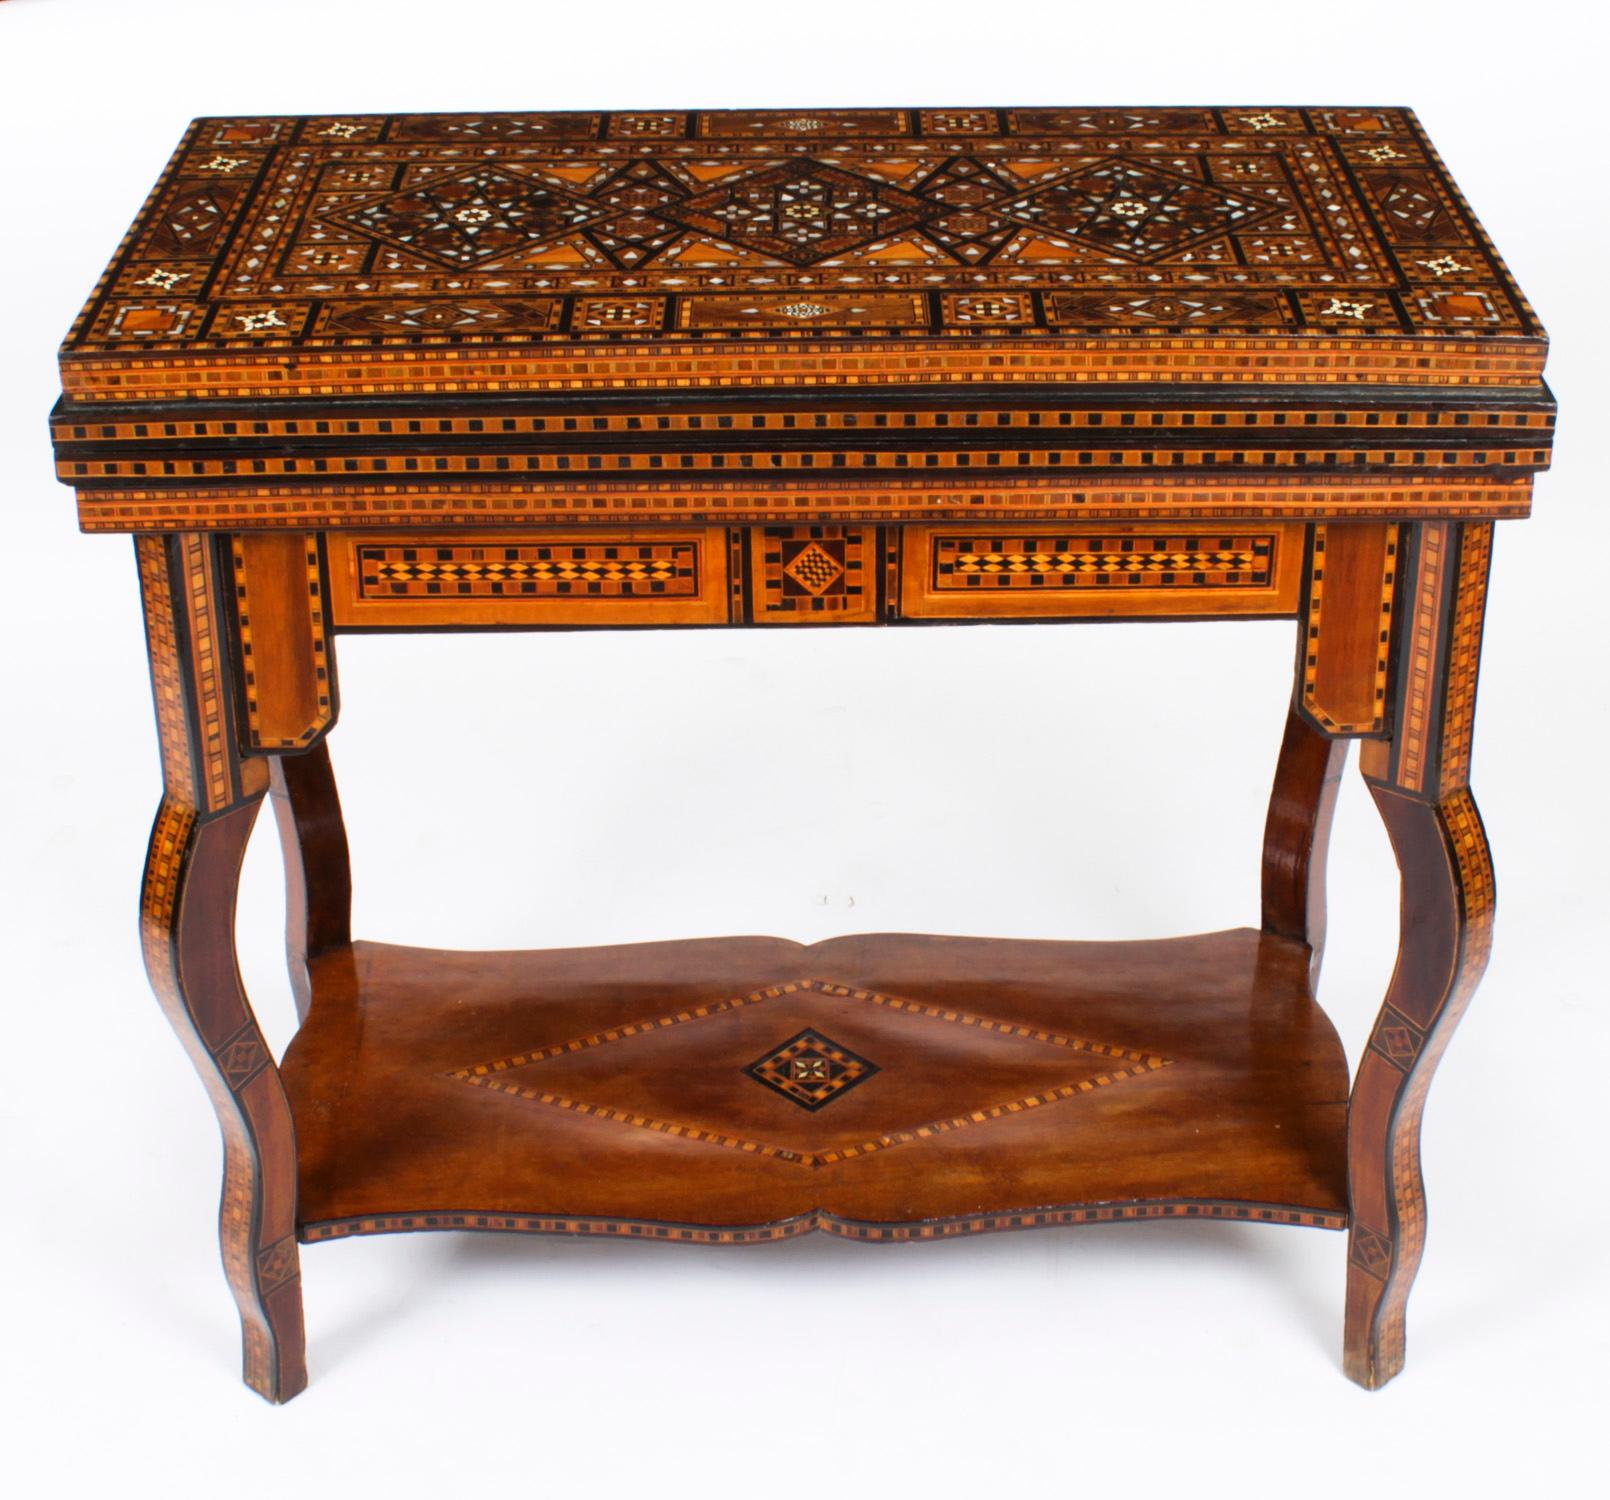 This profusely inlaid Syrian Damascus games table dates from Circa 1900, and has multiple geometric and asymmetric inlays of various specimen woods
 
The hinged lid opens to reveal a similarly inlaid interior and a removable reversible top with